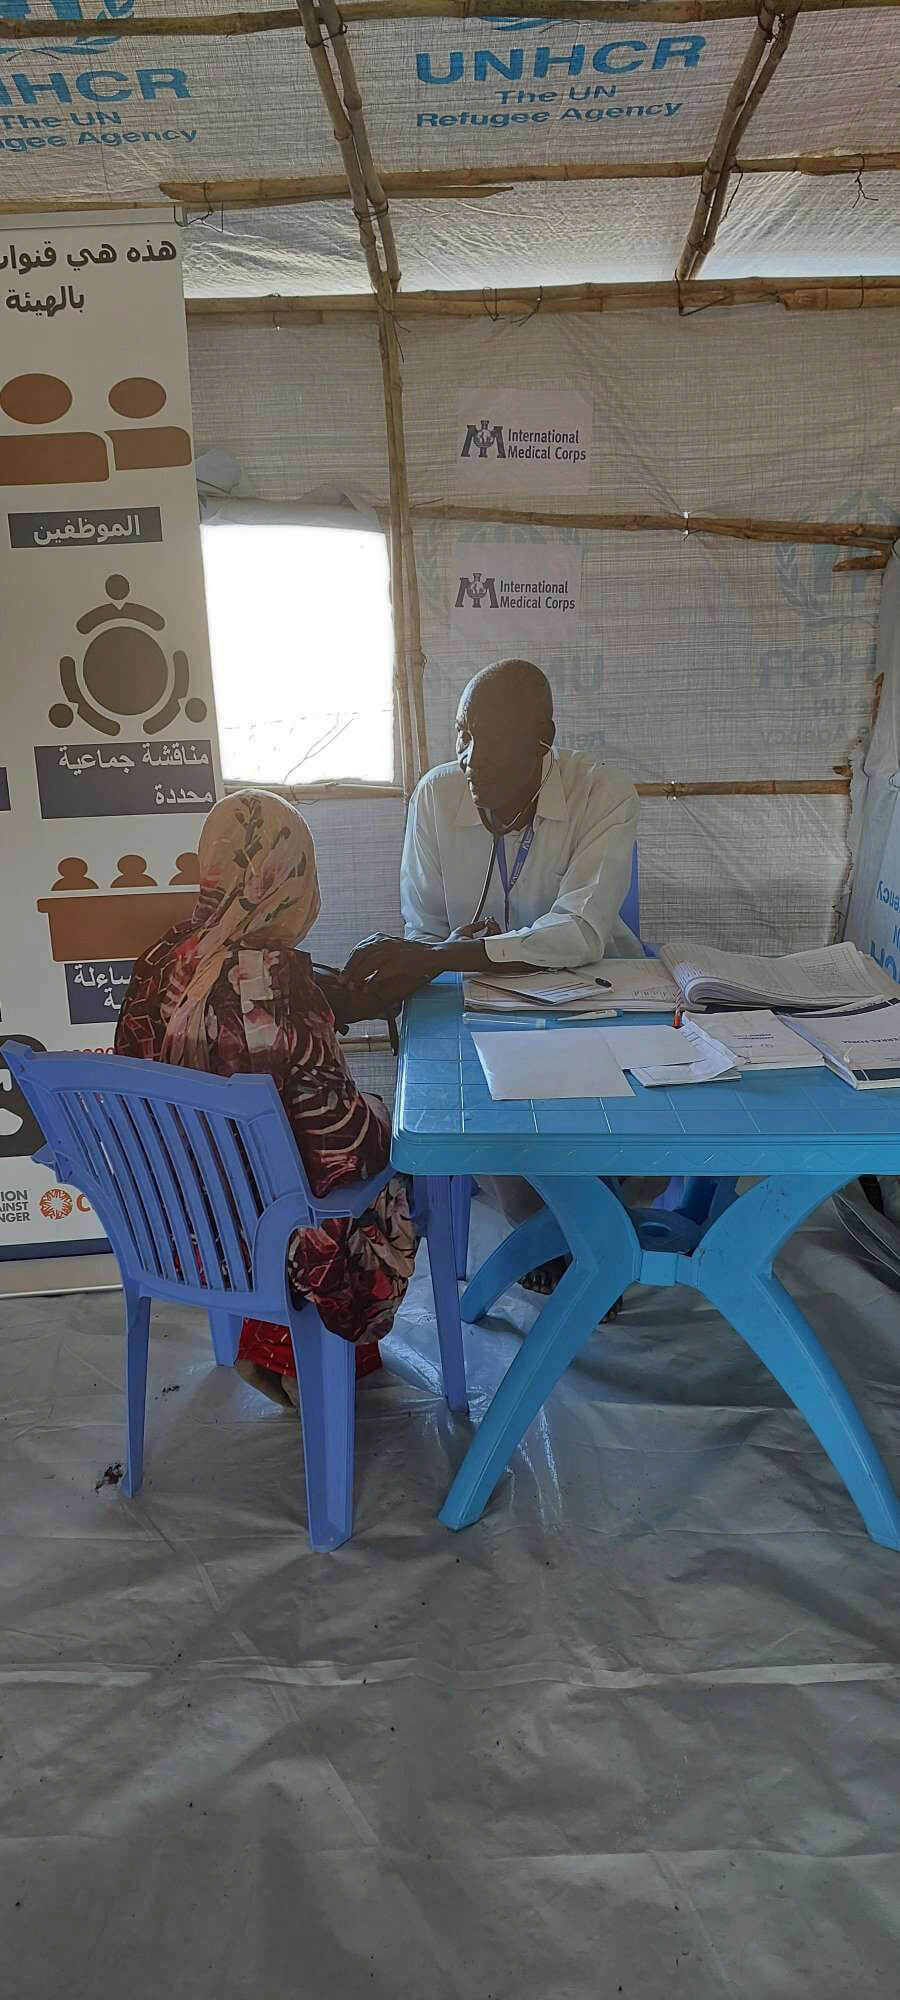 A clinical officer provides a health consultation for a displaced woman in Renk, South Sudan.